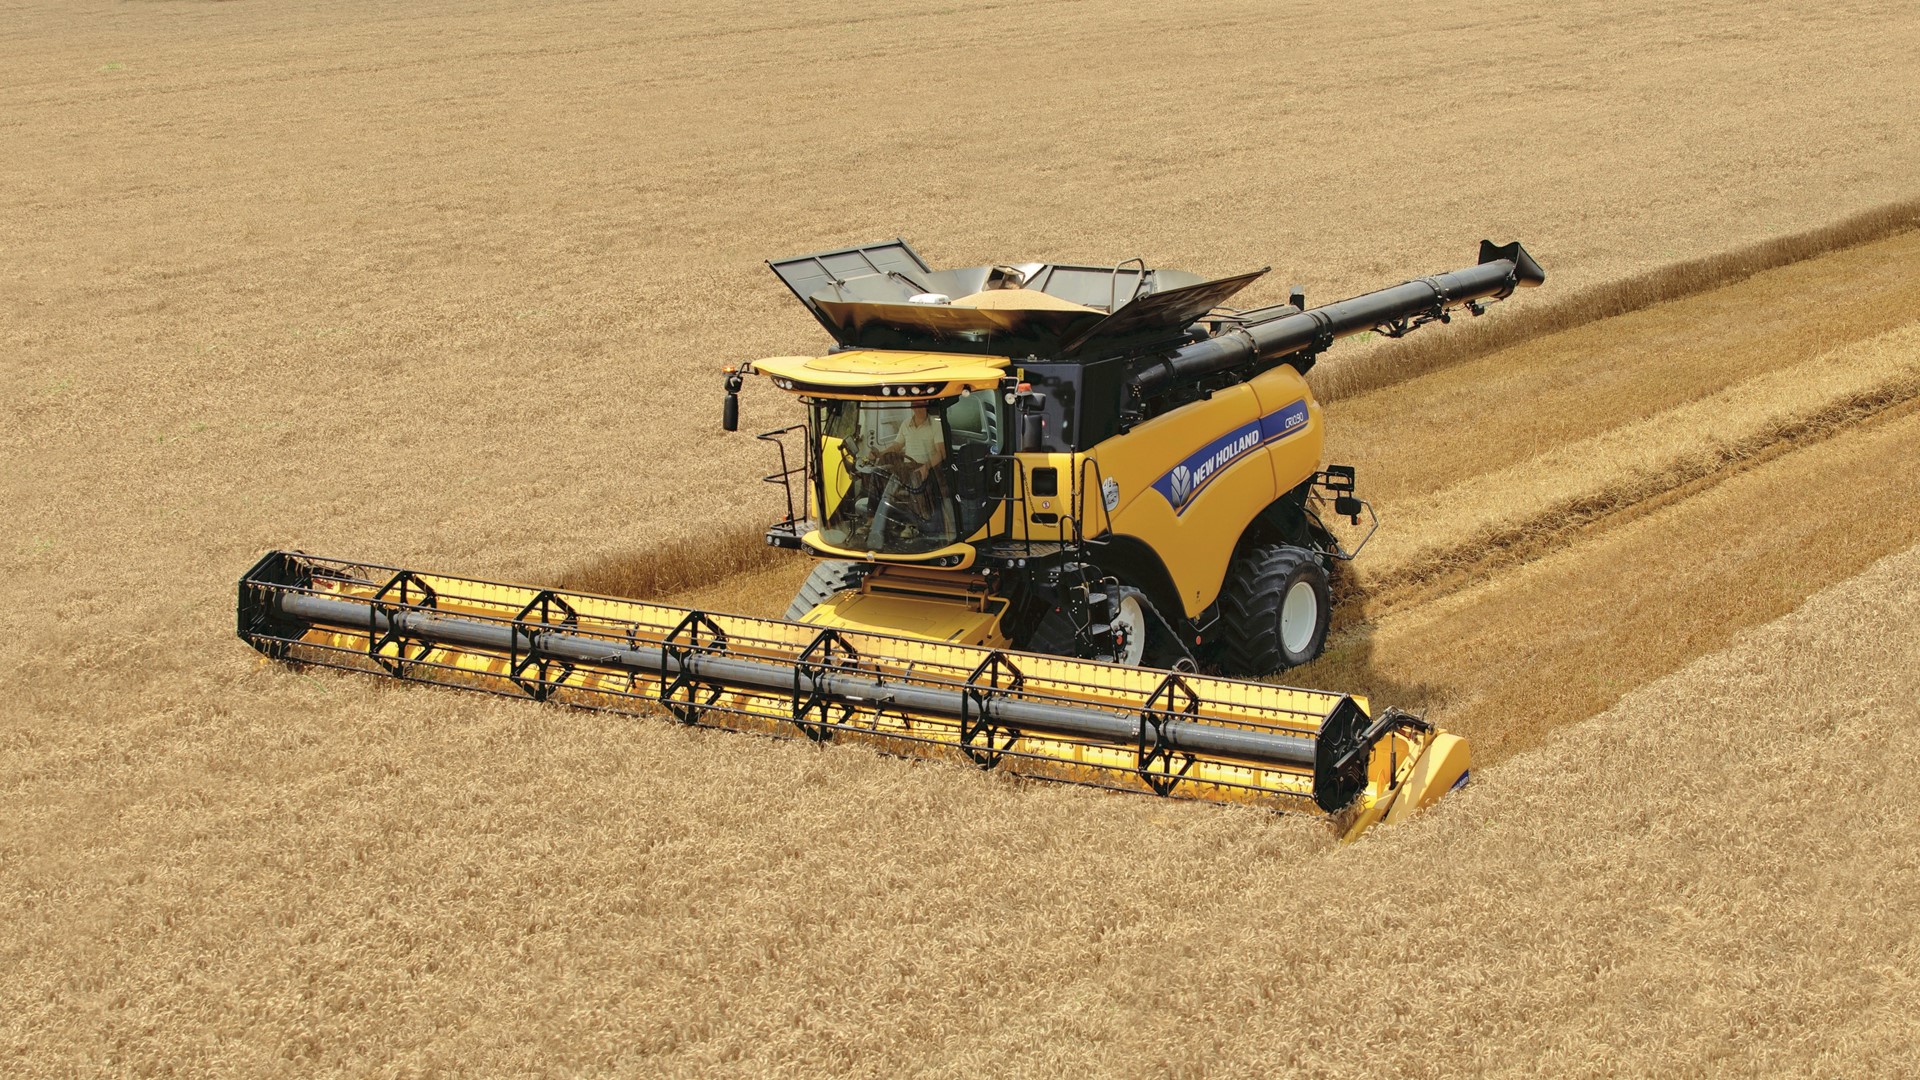 New Holland Agriculture CR10.90 Combine, the World's most powerful combine harvester